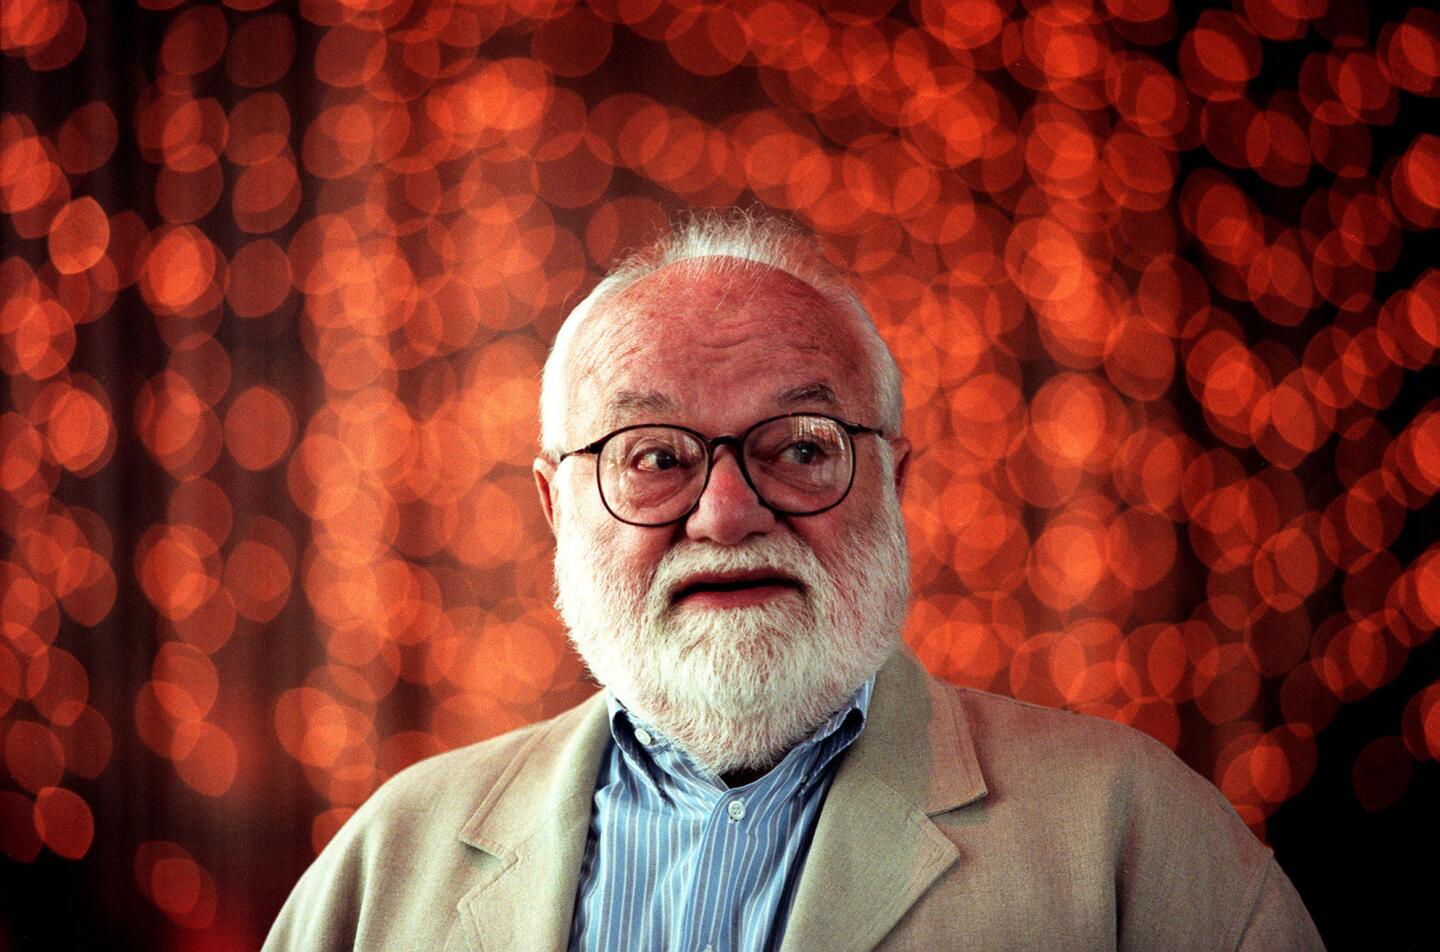 Saul Zaentz produced "One Flew Over the Cuckoo's Nest," "Amadeus" and "The English Patient."